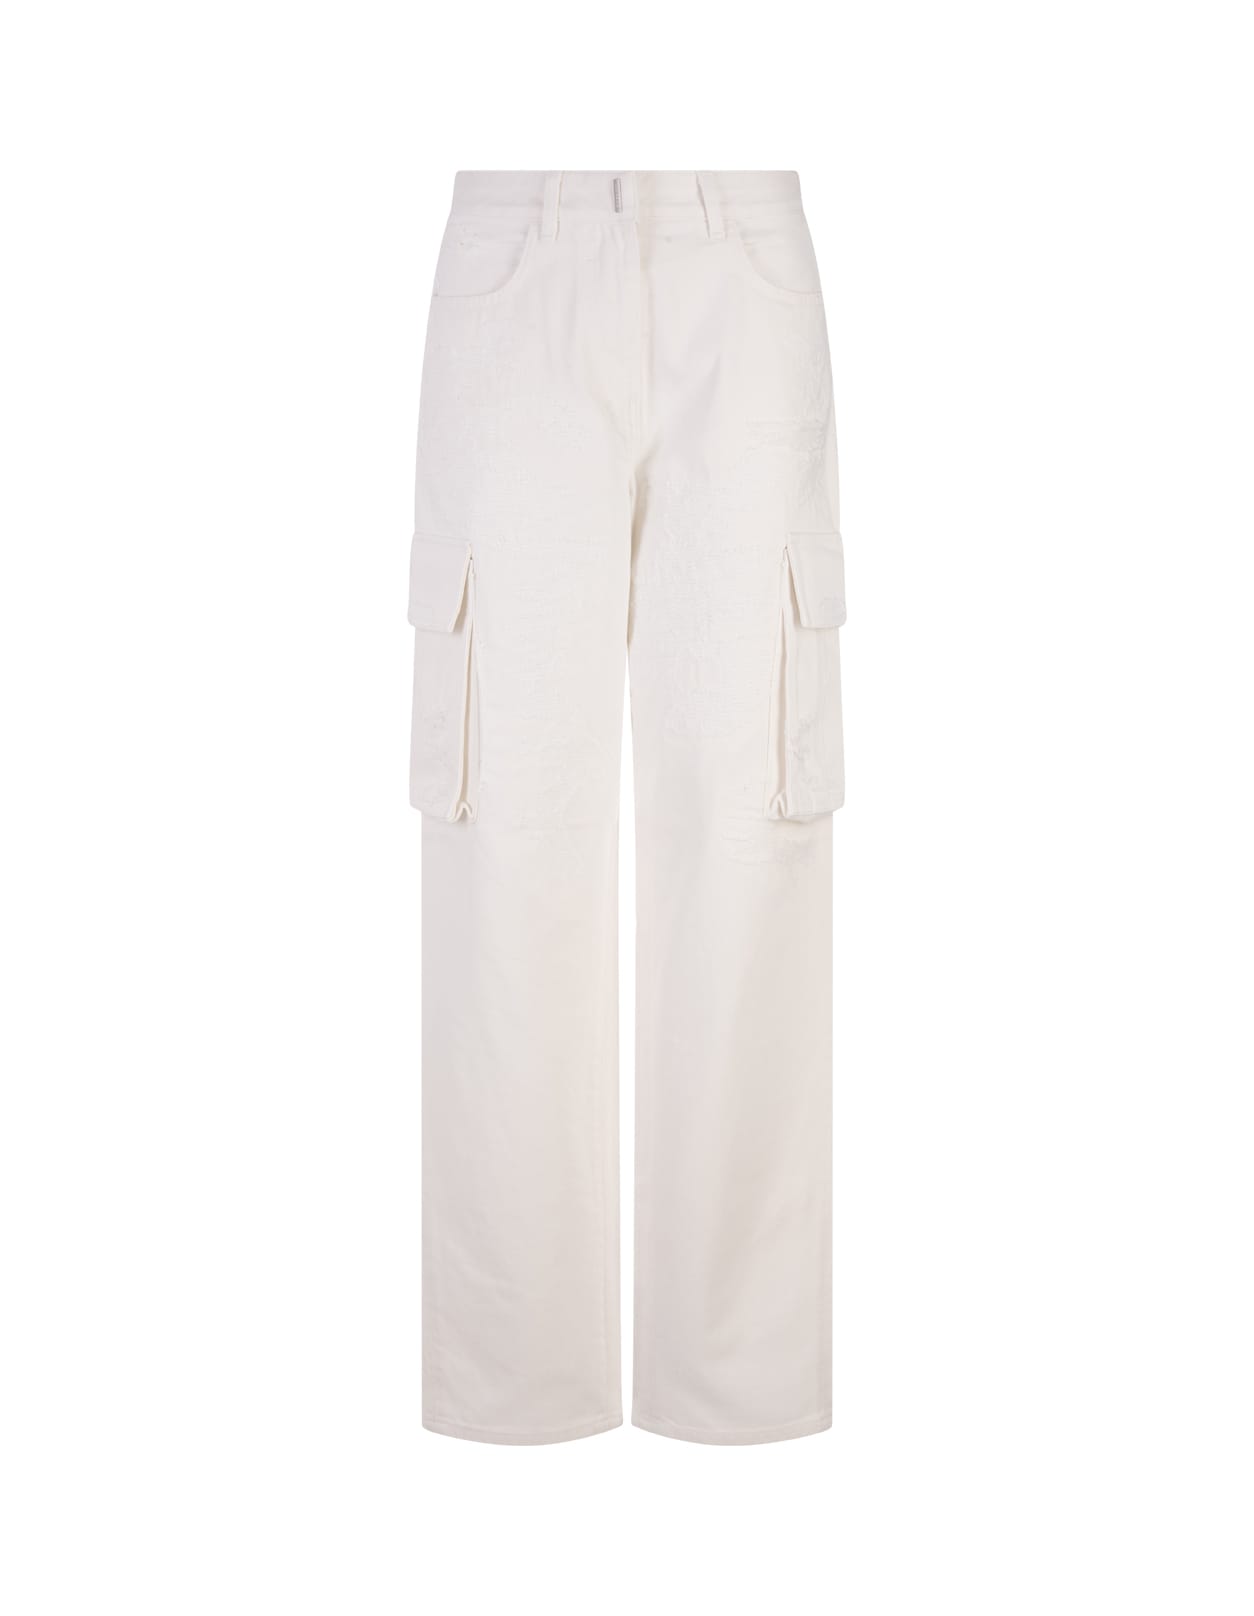 GIVENCHY WHITE DENIM CARGO TROUSERS